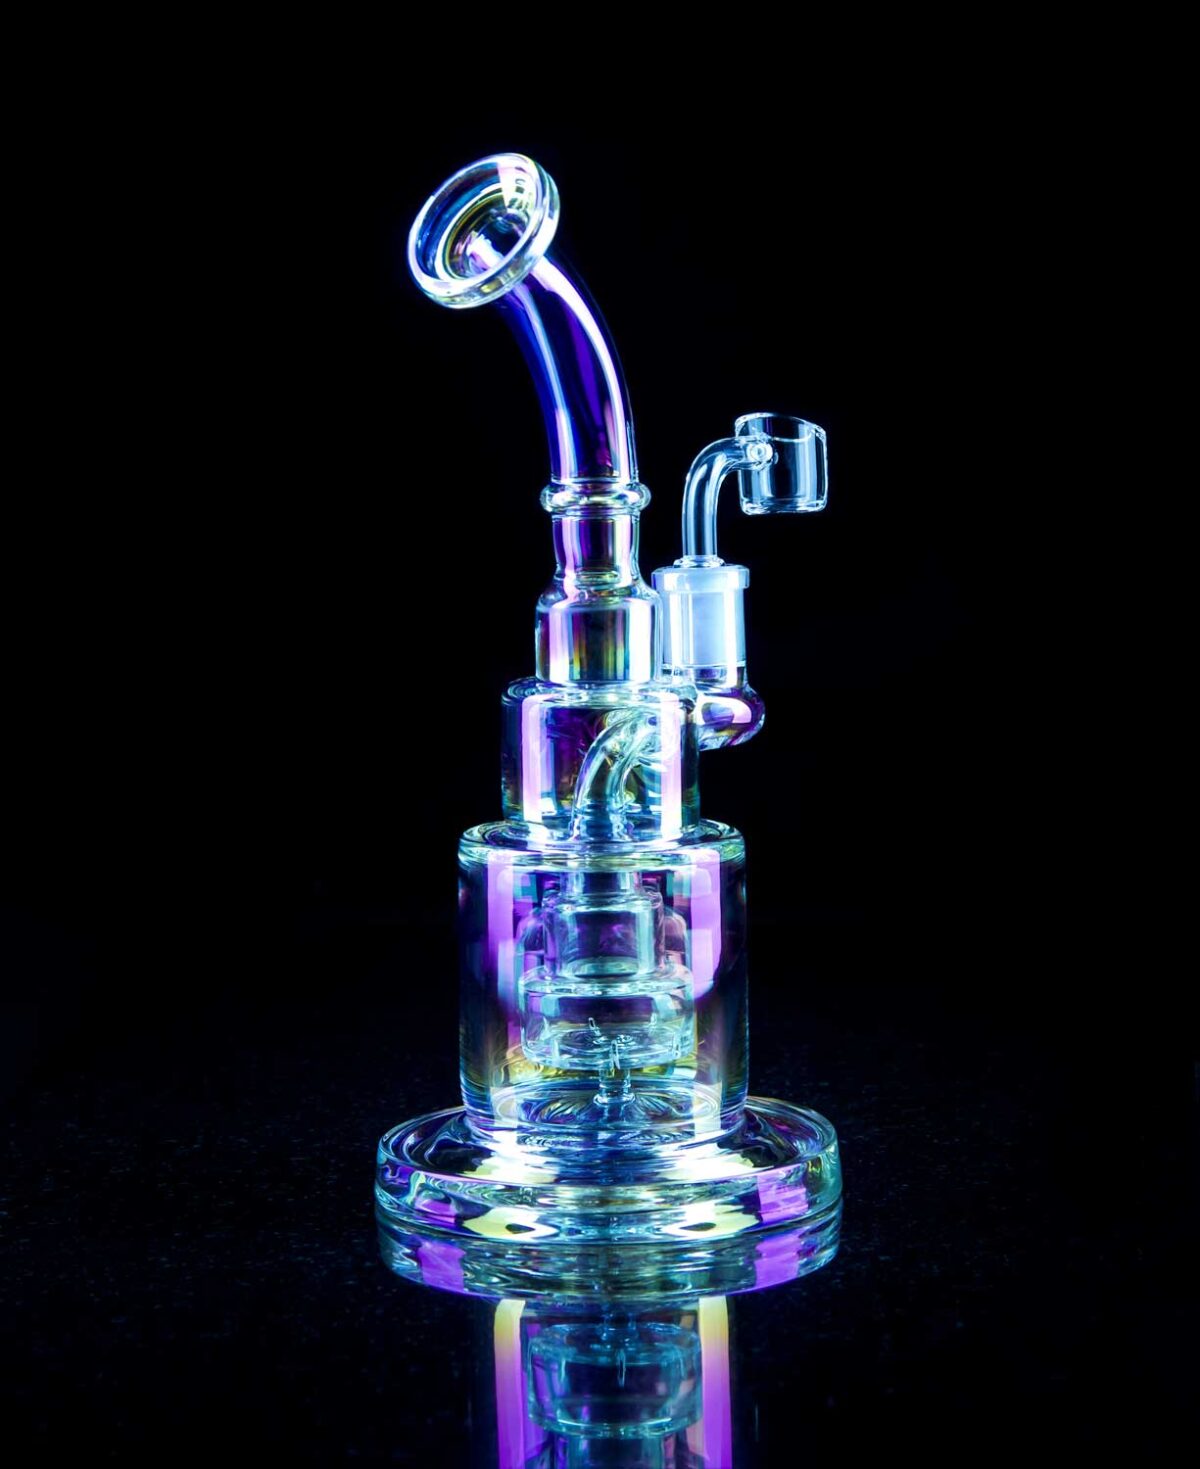 iridescent rig in cake shape